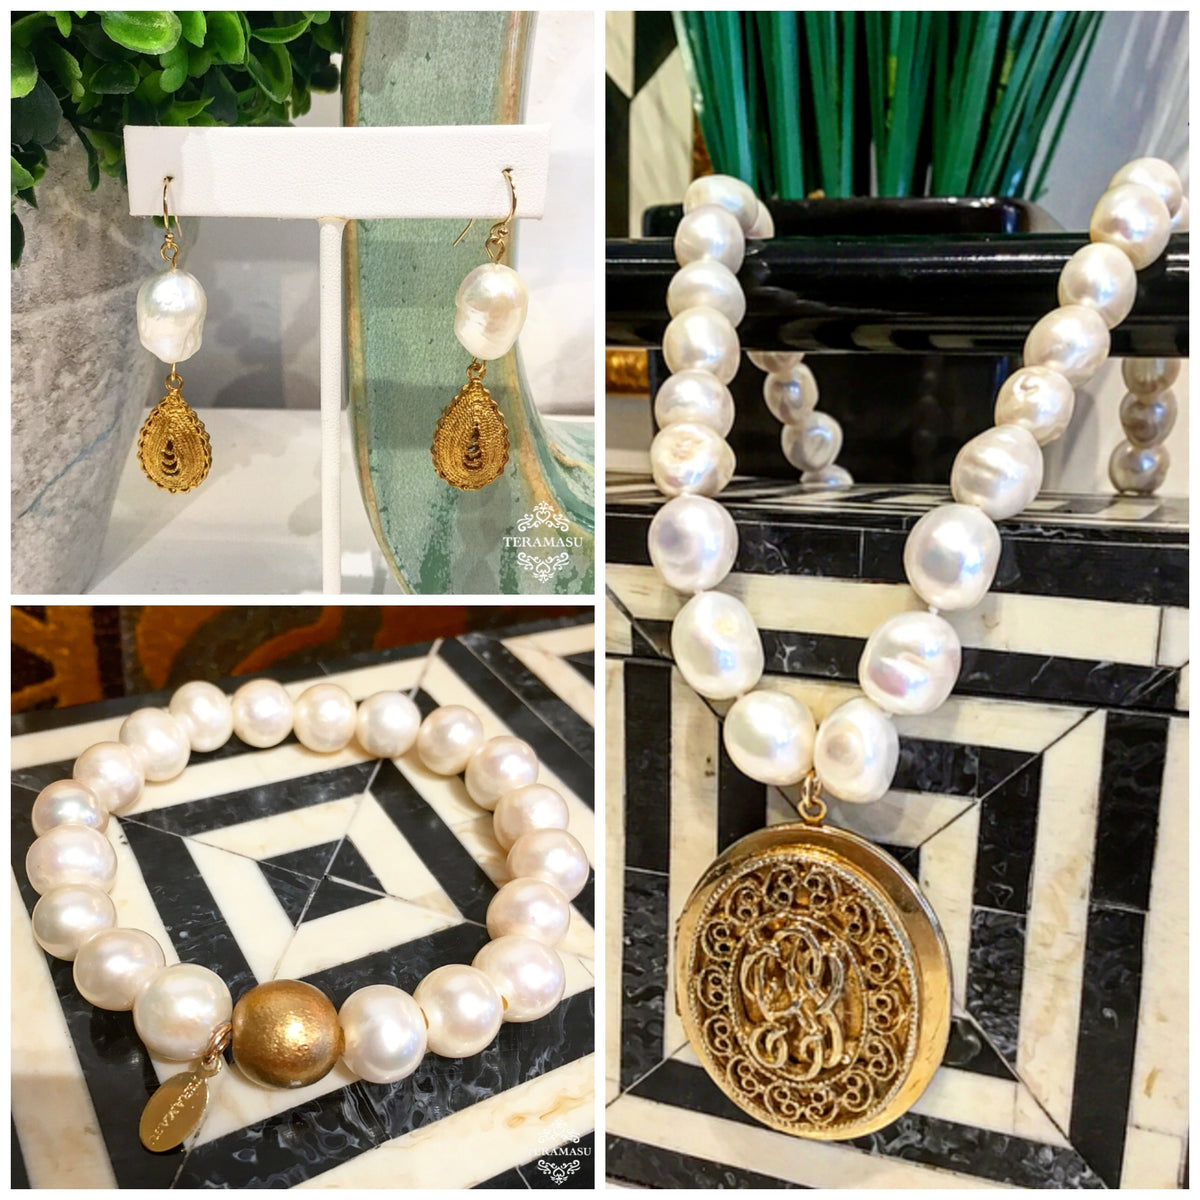 Fashion Friday: Fabulous New Arrivals & Classic Pearl Jewelry Inspiration for Your One-of-a-Kind Style from Teramasu